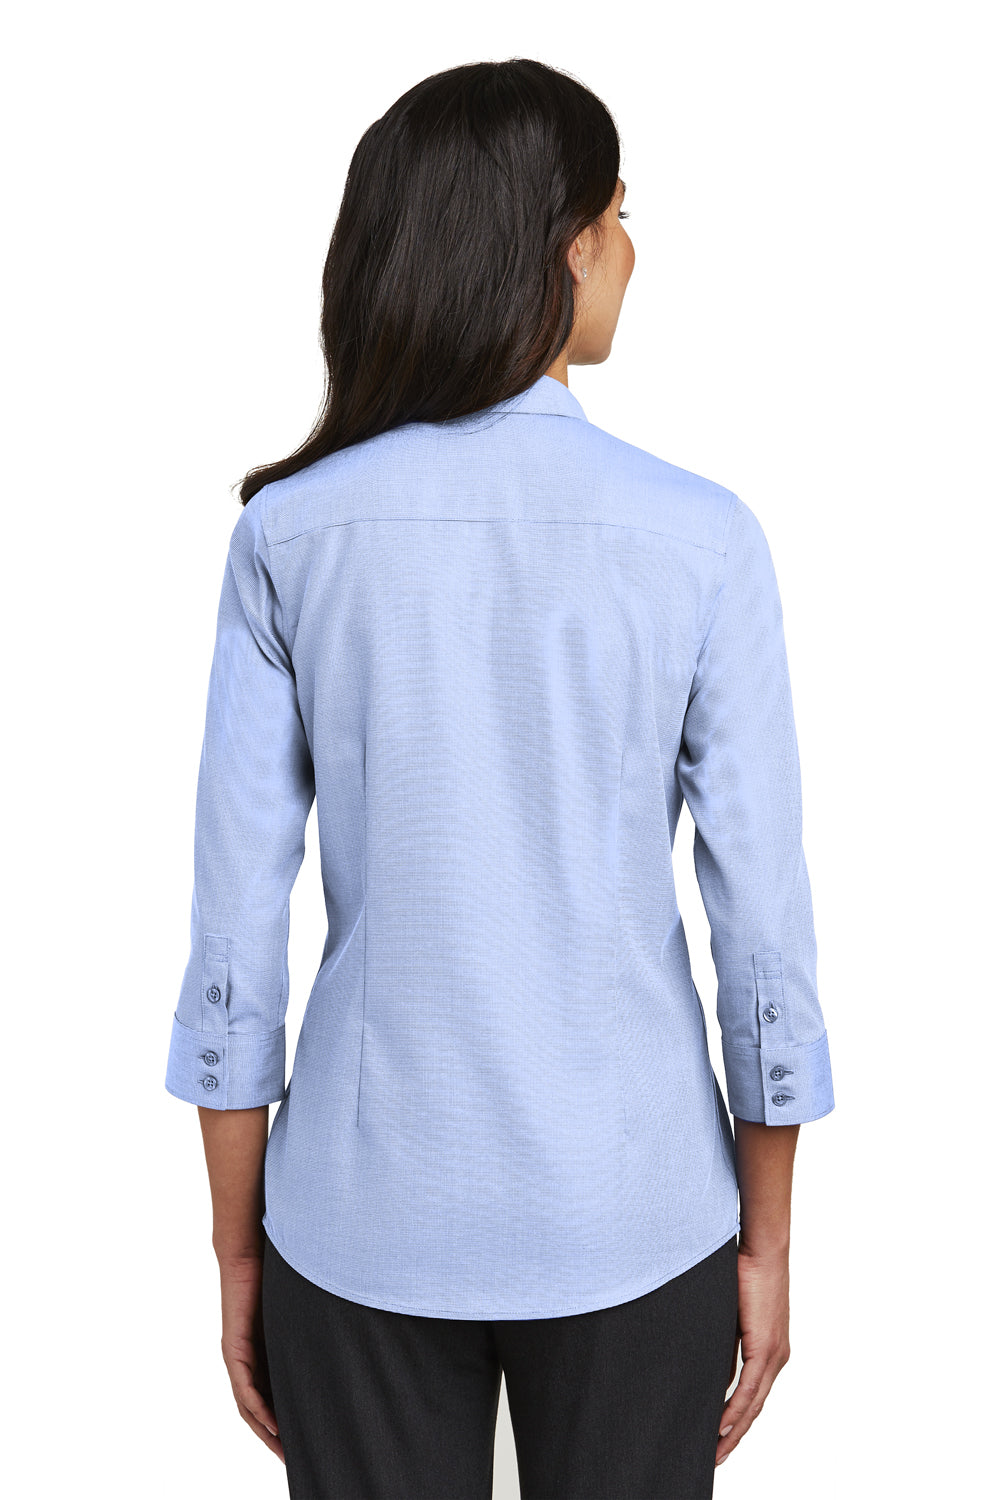 Red House RH690 Womens Nailhead Wrinkle Resistant 3/4 Sleeve Button Down Shirt Pearl Blue Back